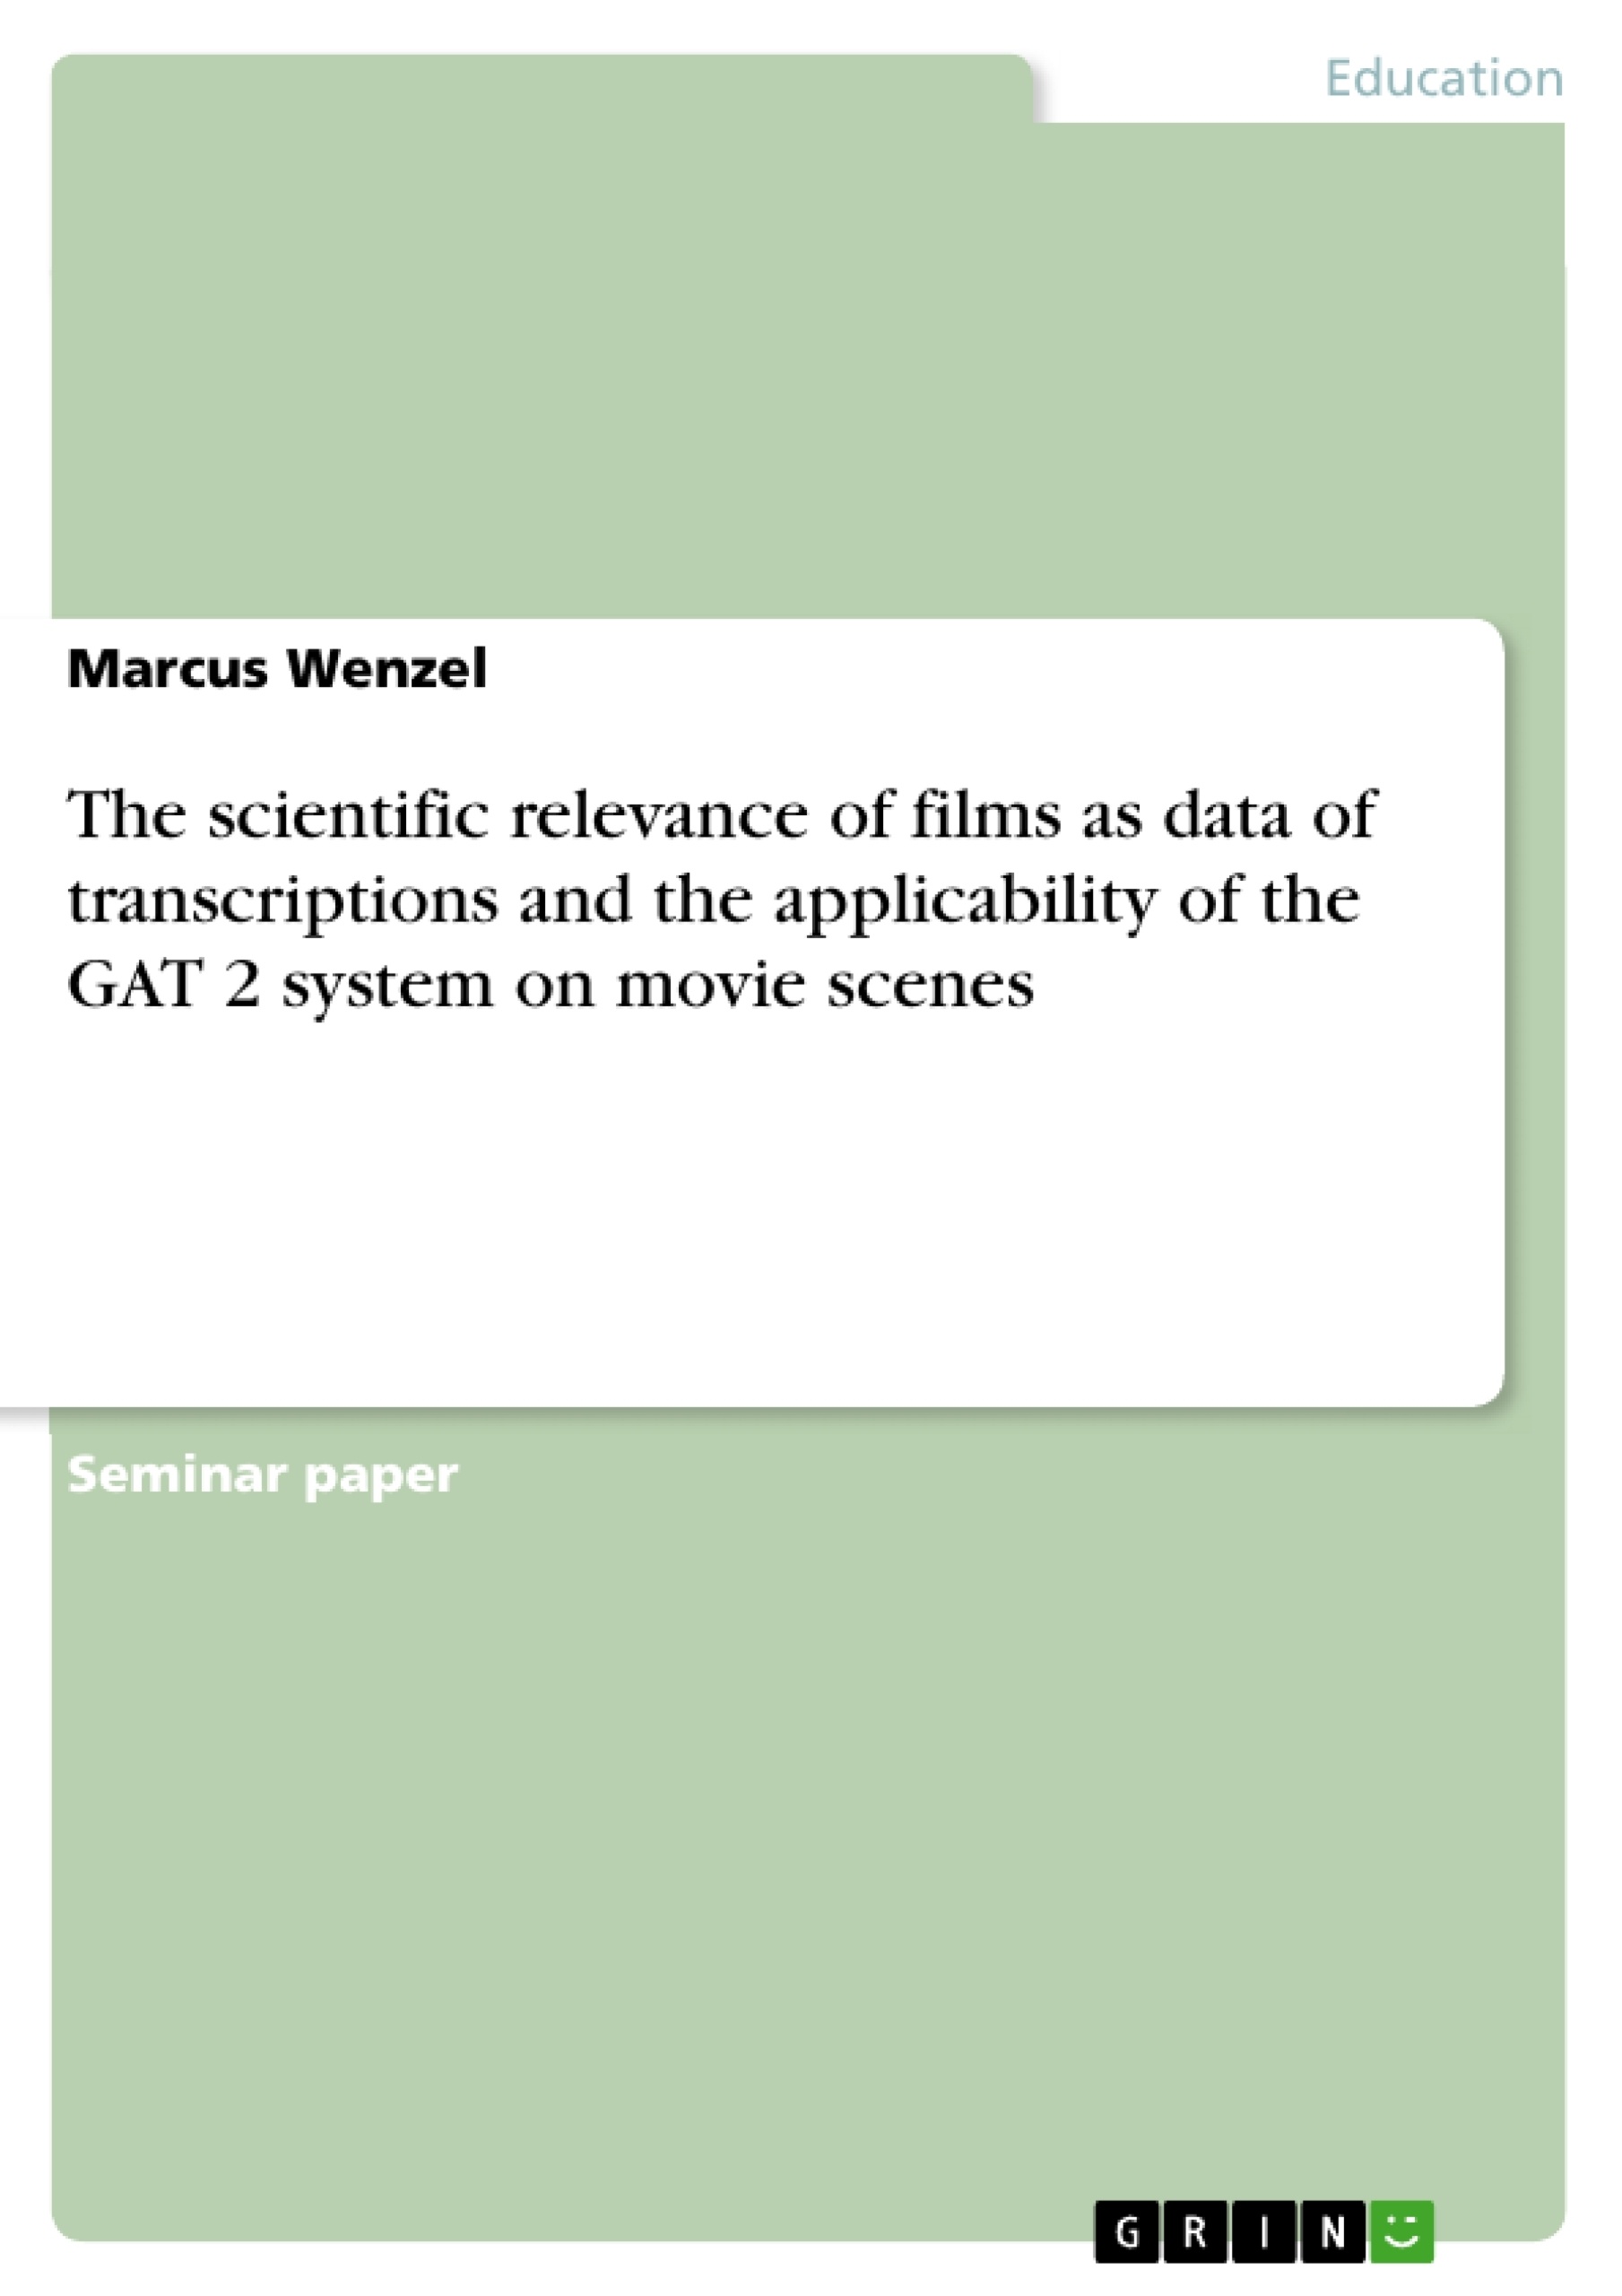 Titre: The scientific relevance of films as data of transcriptions and the applicability of the GAT 2 system on movie scenes